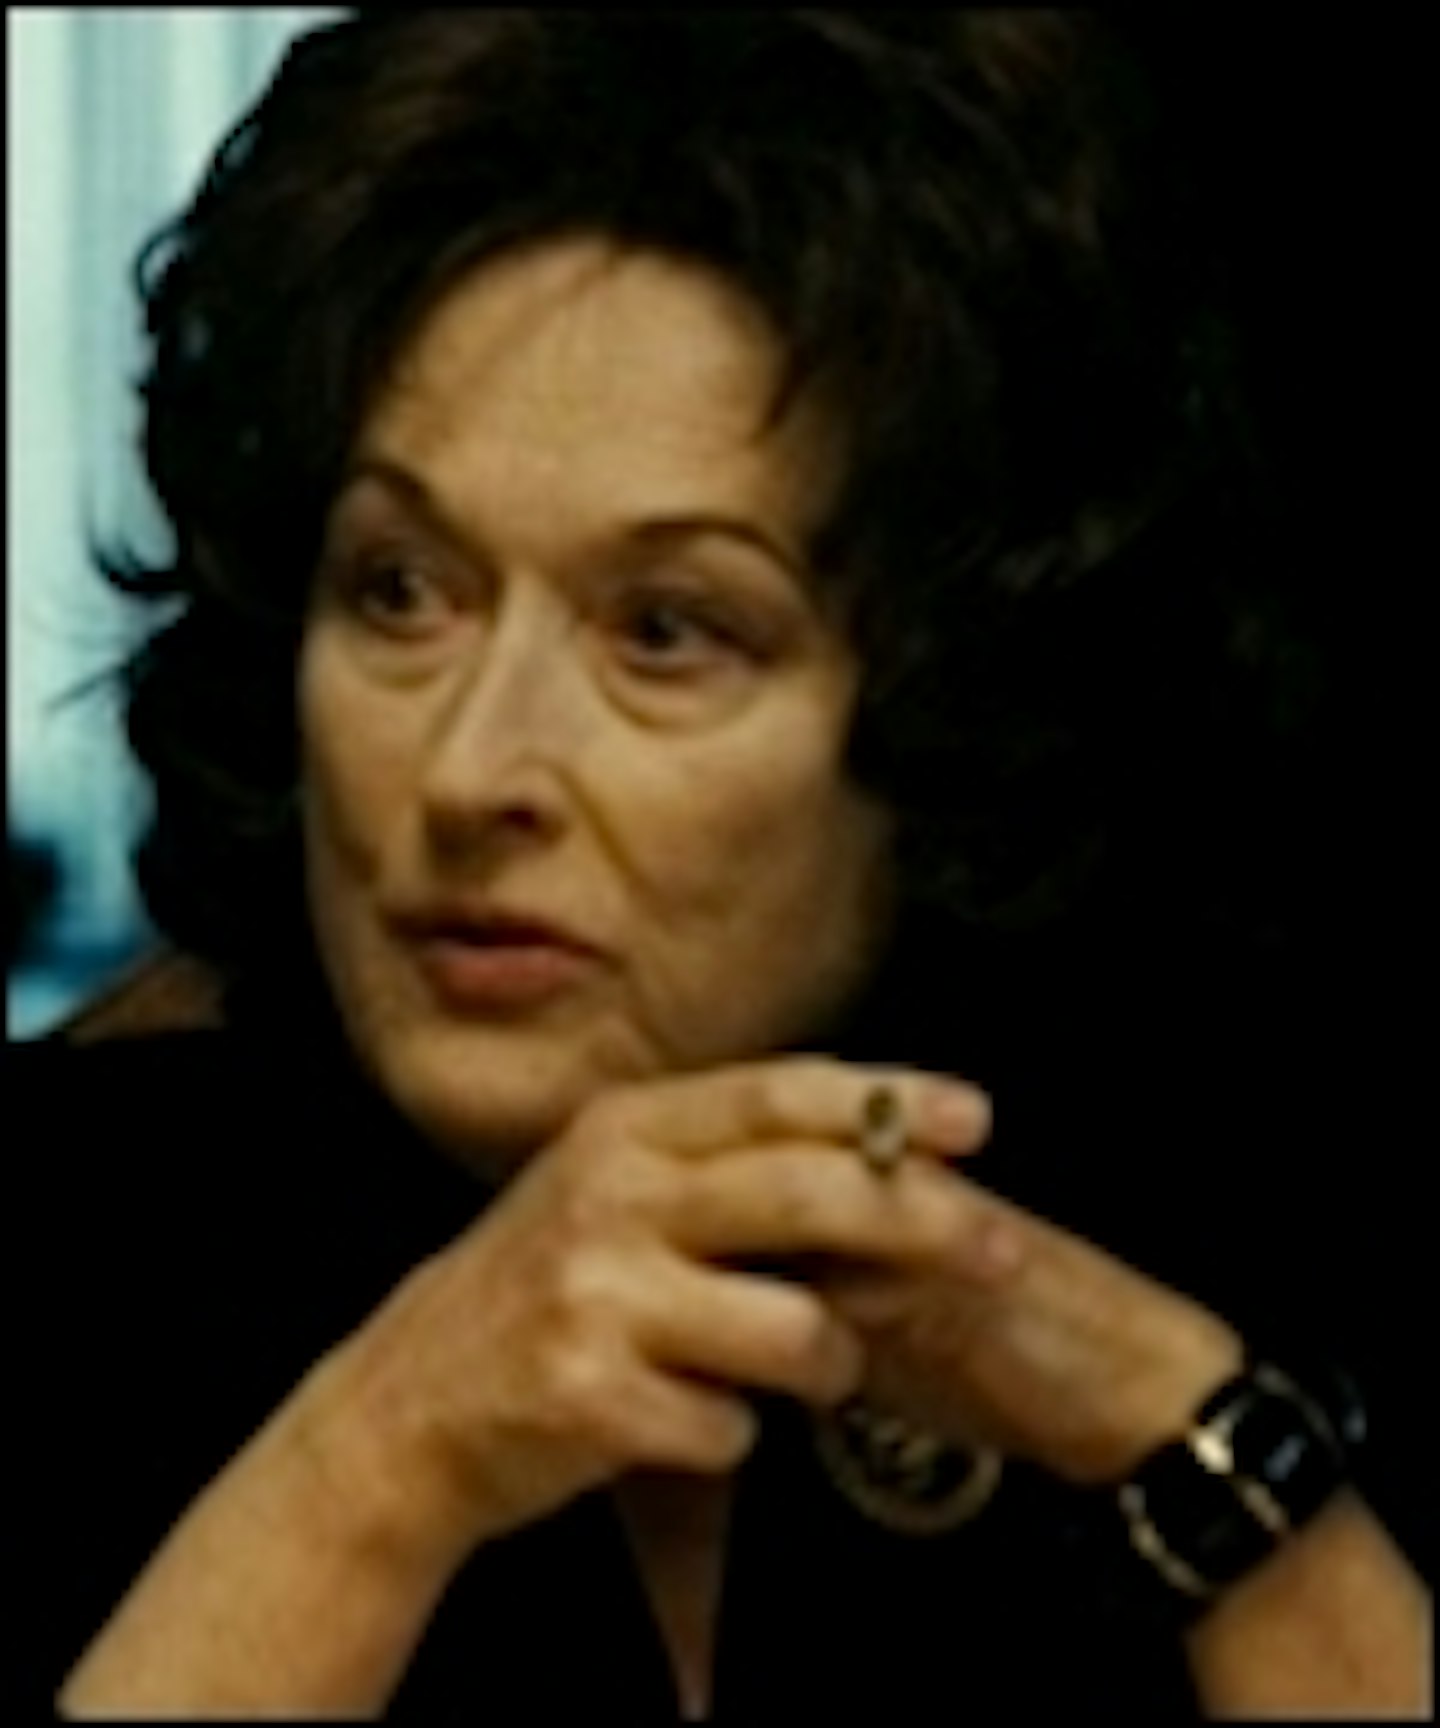 August: Osage County Trailer Arrives